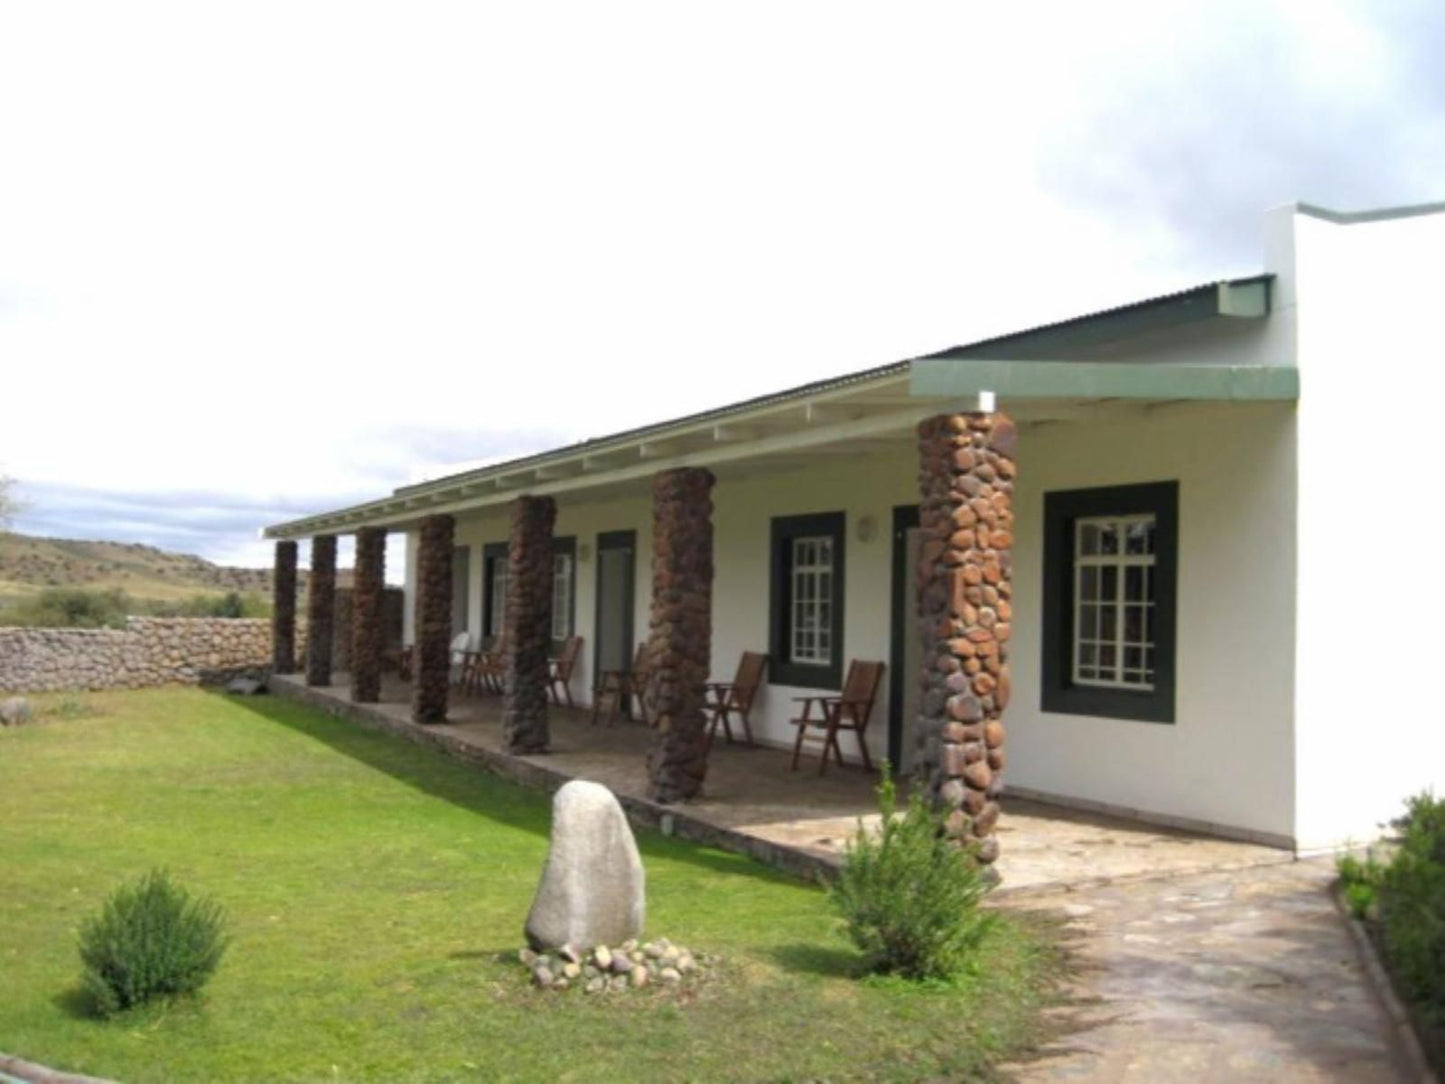 Quaggasfontein Private Game Reserve Colesberg Northern Cape South Africa House, Building, Architecture